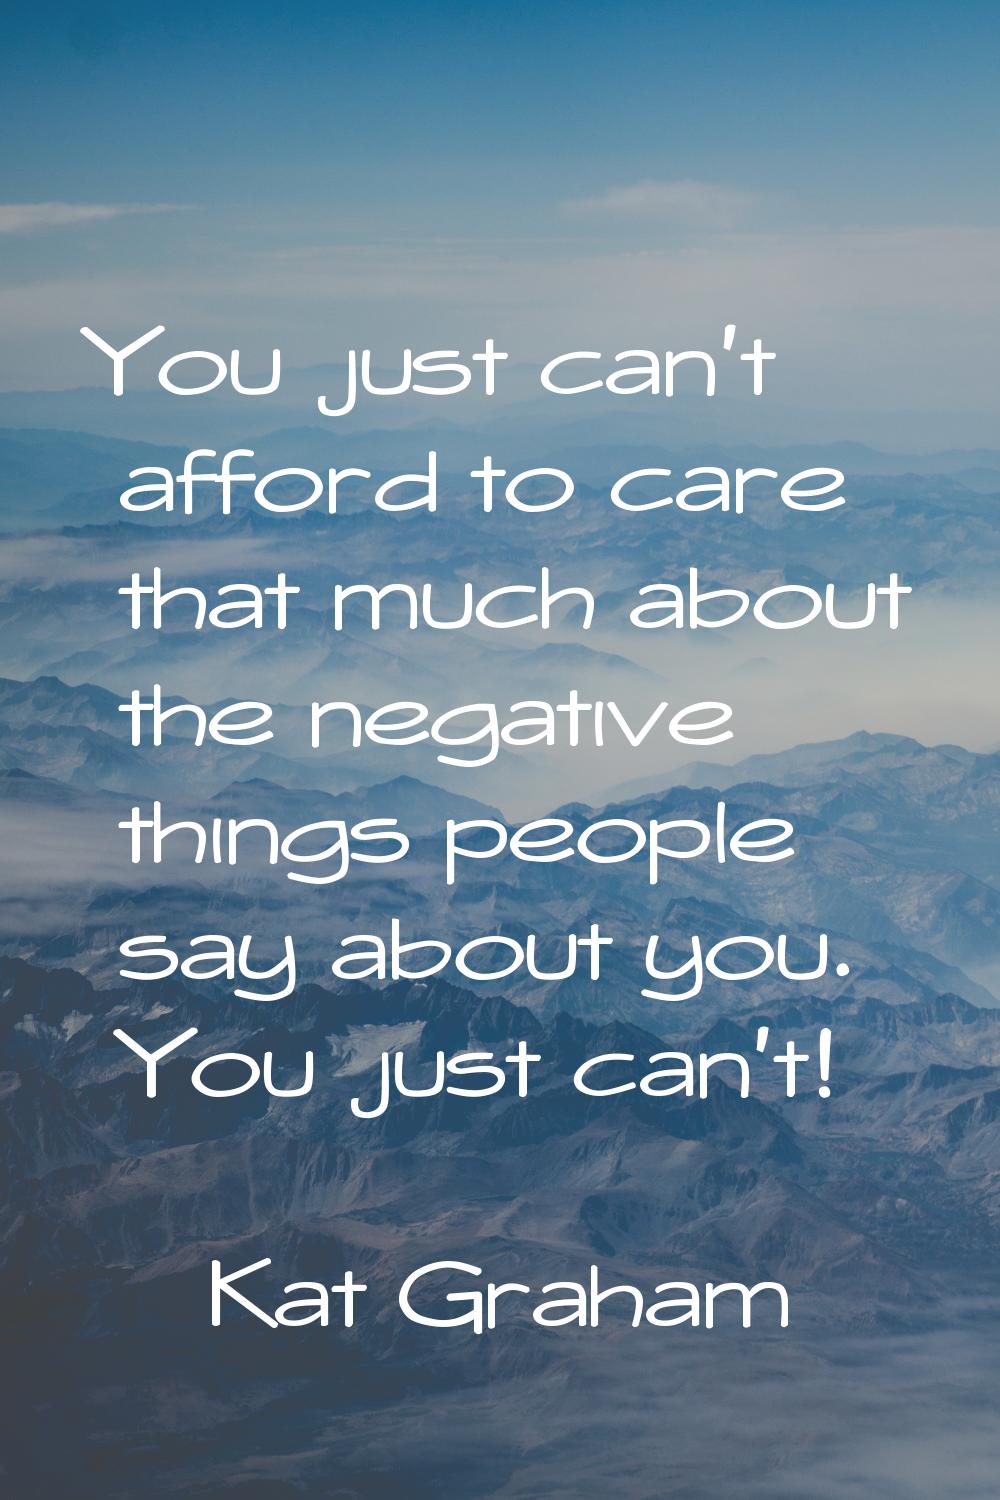 You just can't afford to care that much about the negative things people say about you. You just ca